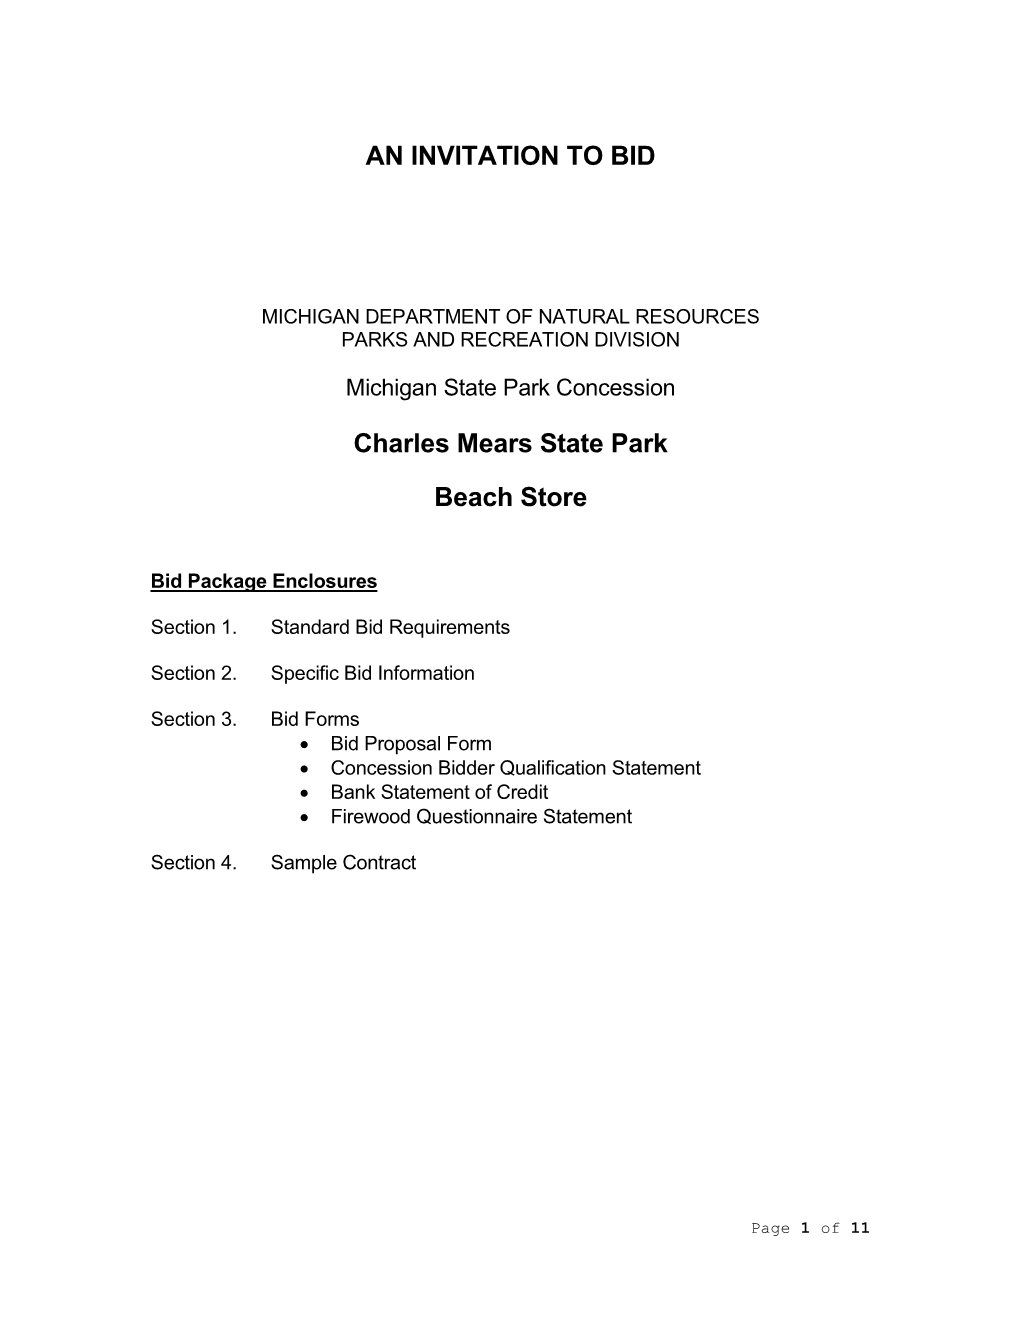 Mears State Park Request for Proposal for Beach Concession